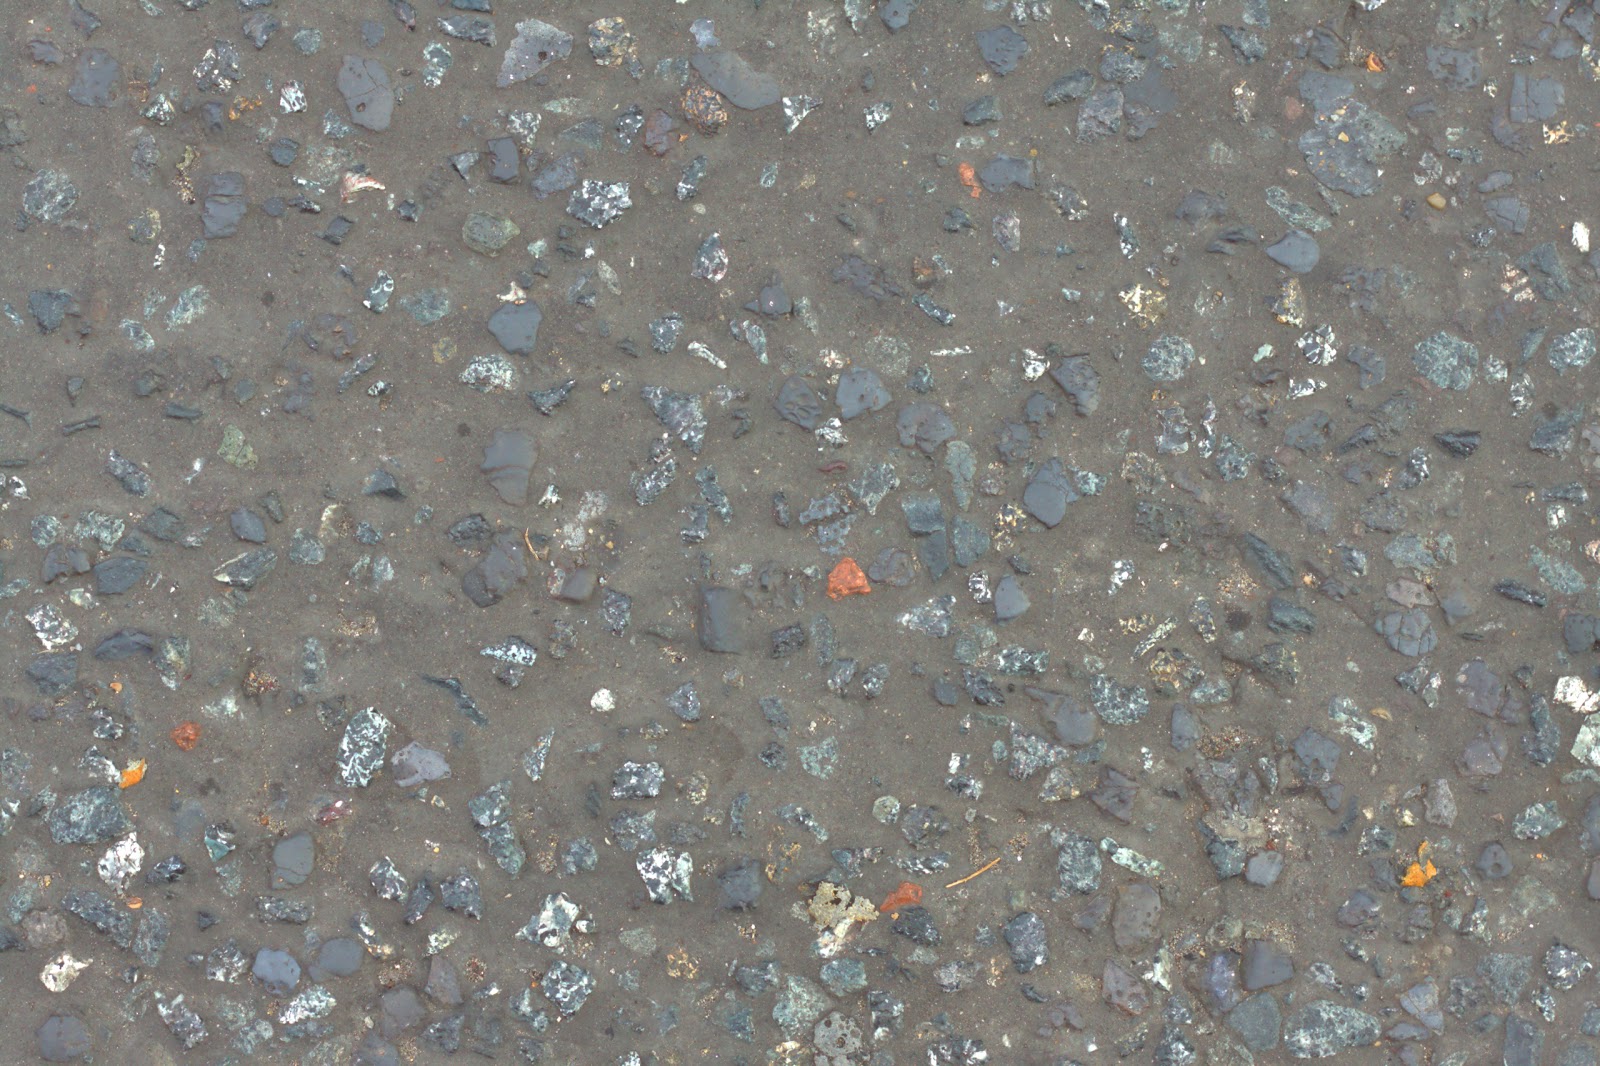 Dirt and stone ground texture 4770x3178